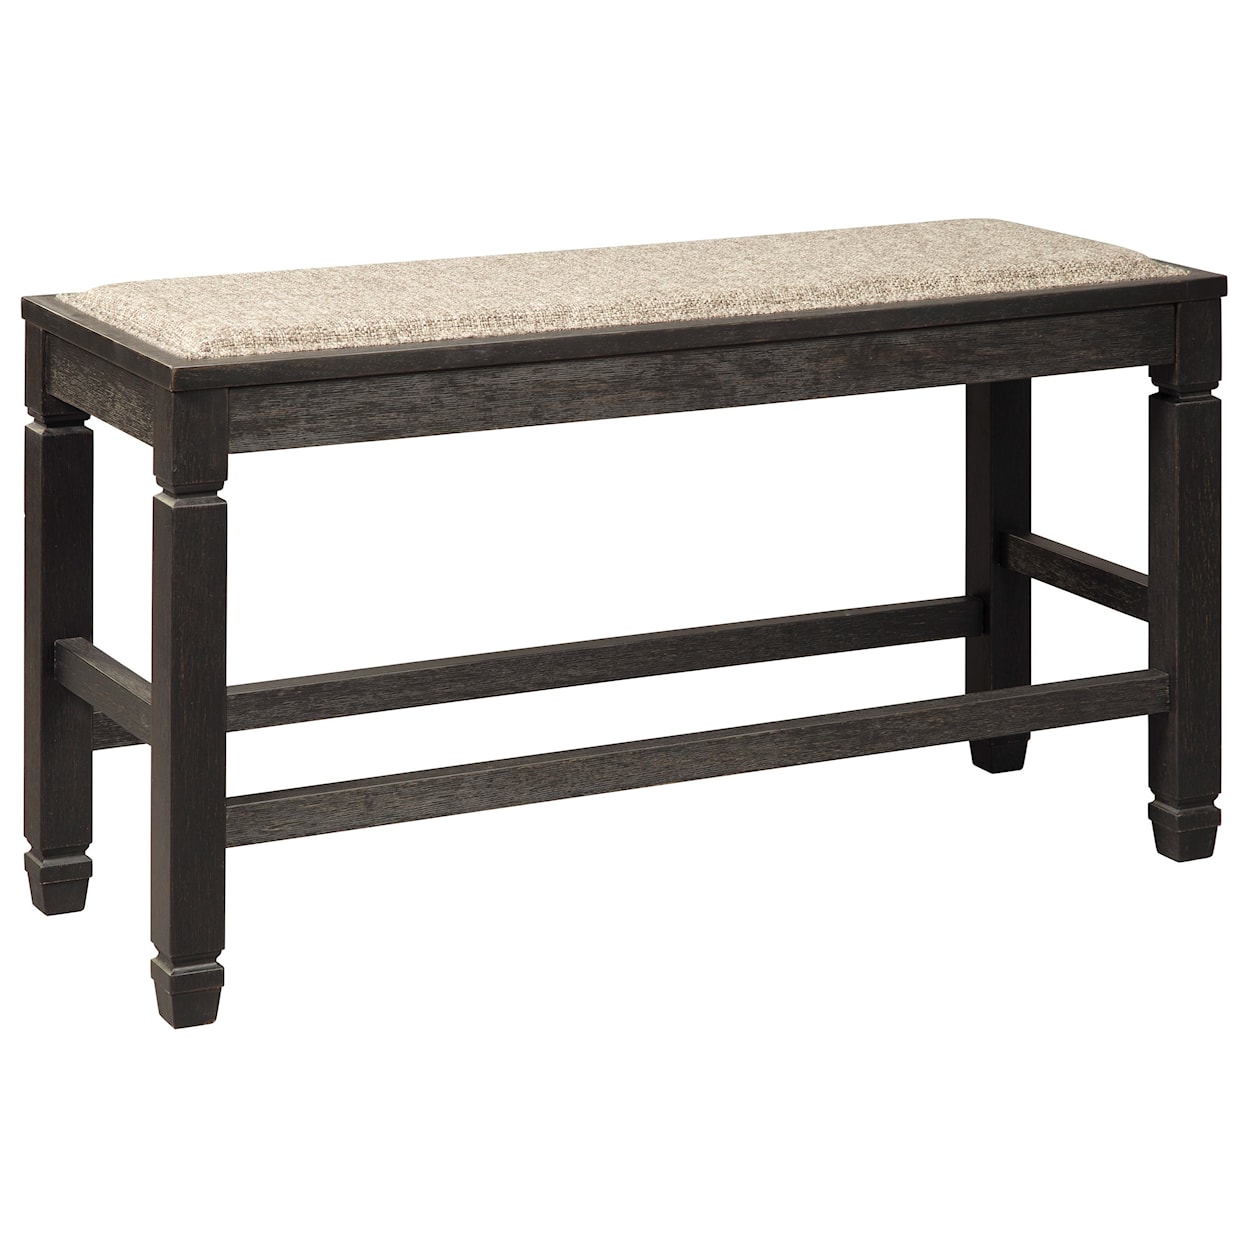 Signature Design by Ashley Tyler Creek 3-Piece Counter Table and Bench Set